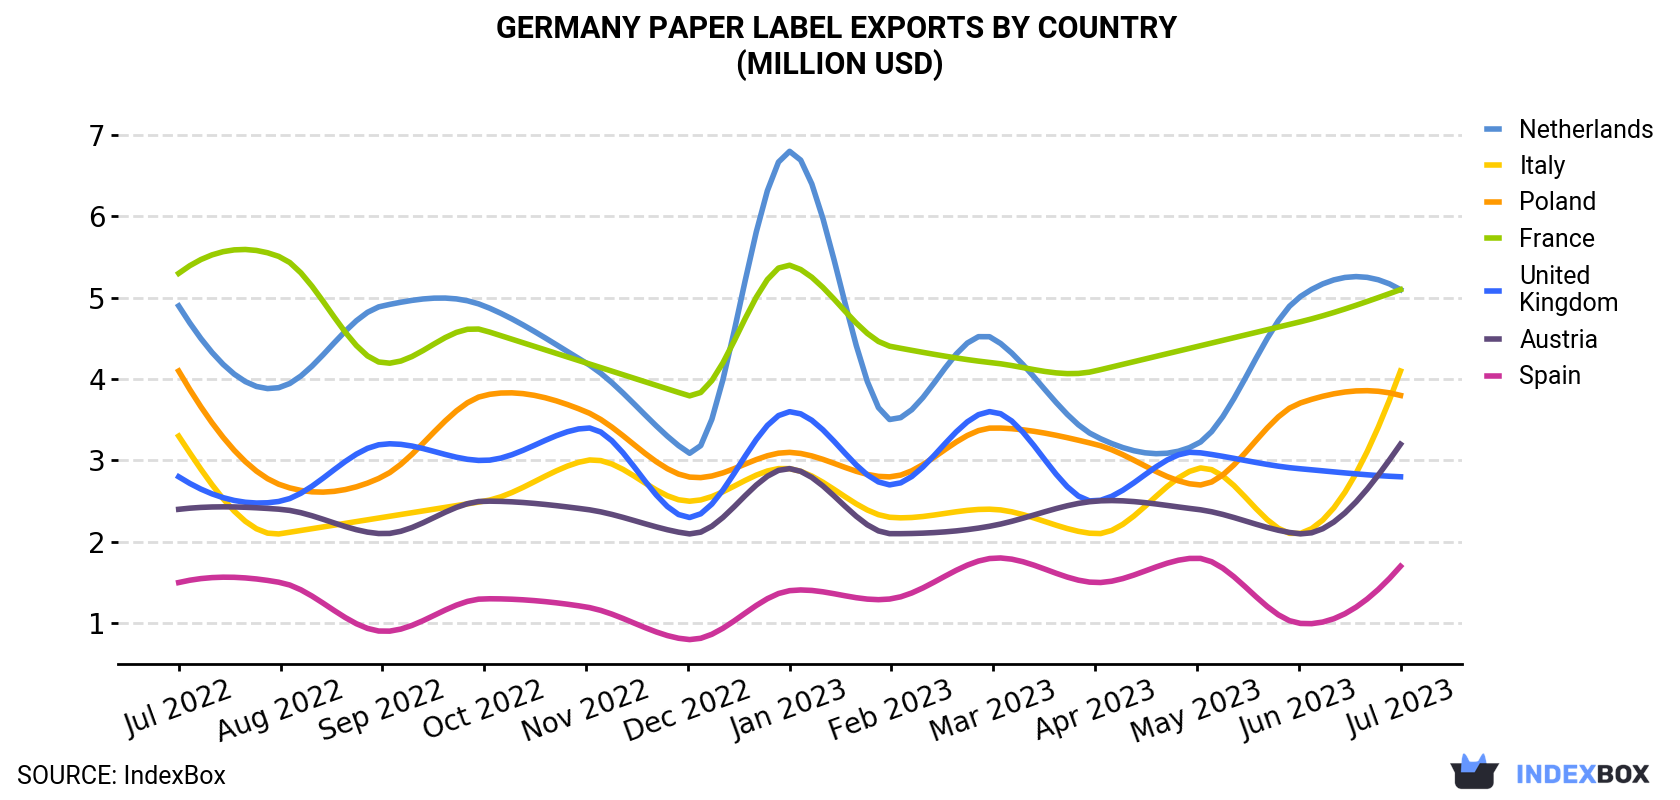 Germany Paper Label Exports By Country (Million USD)